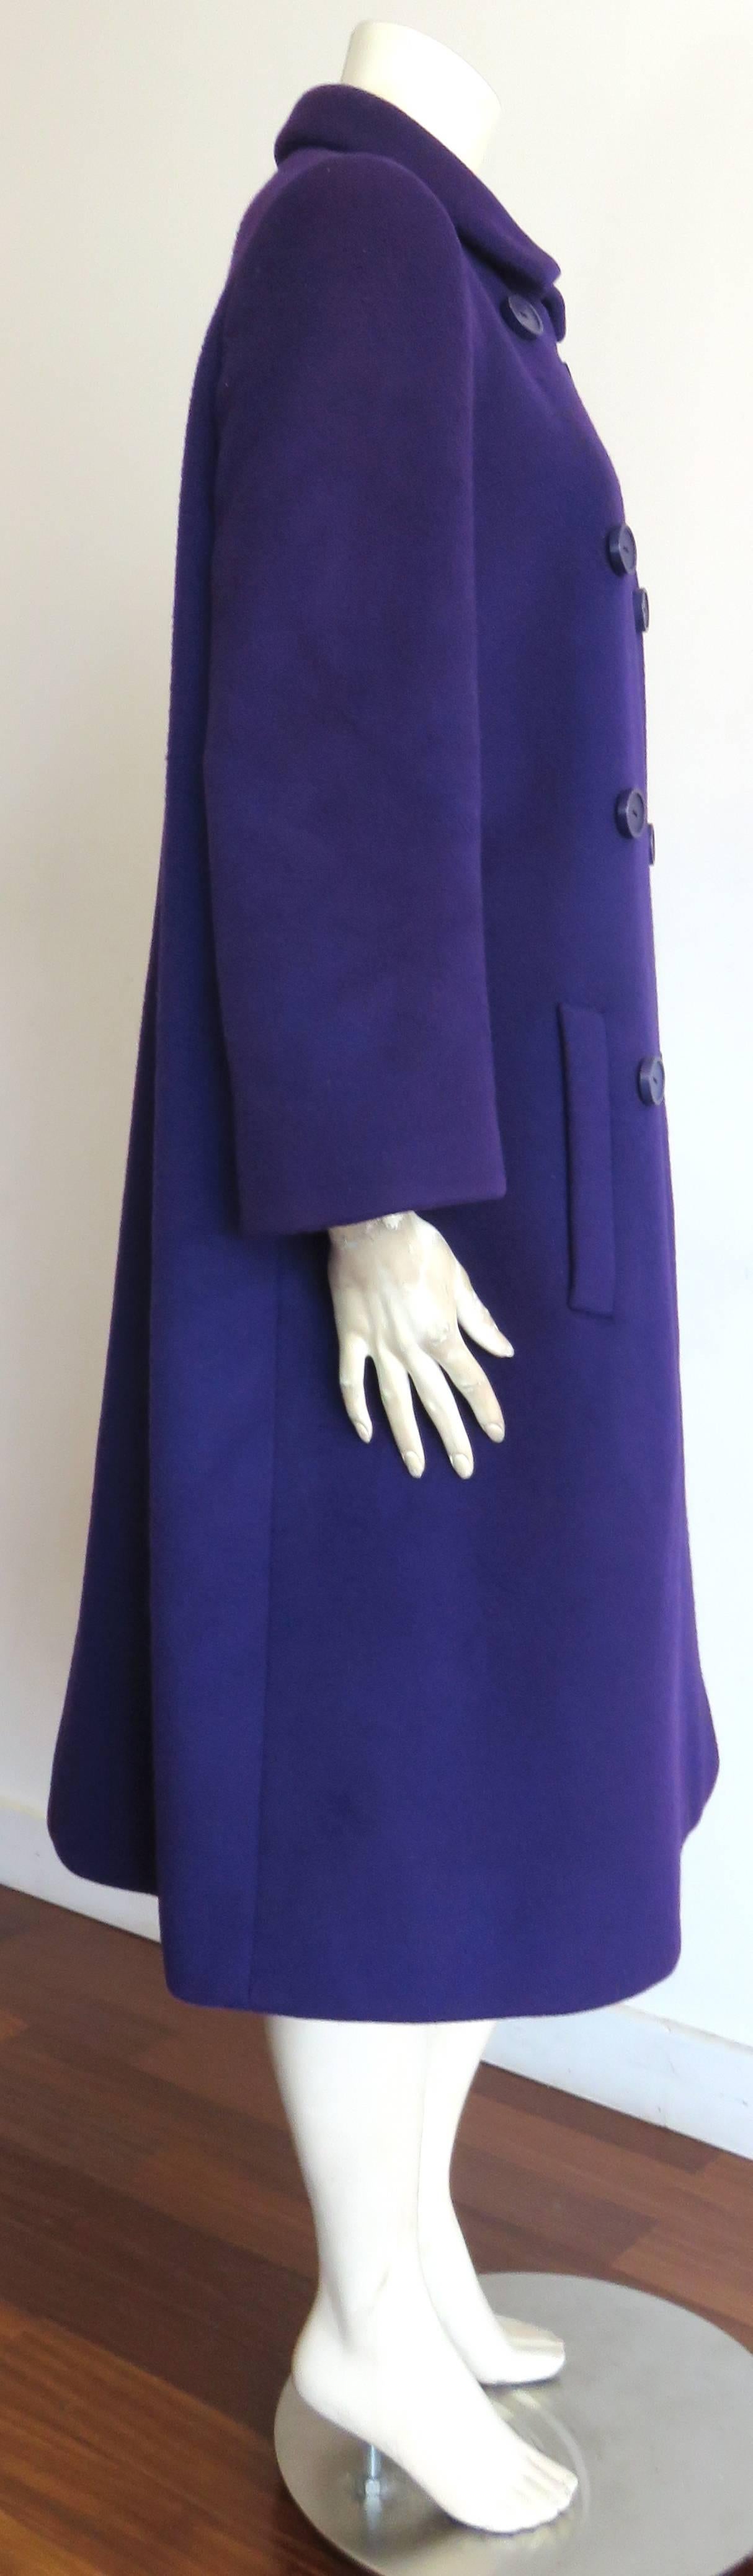 Wonderful, 1960's NORMAN NORELL wool coat featuring Norell's, classic, double-button front, clean-line silhouette.

Purple with blue-tone color, heavy-weight wool fabrication.

Oversized buttons at front.

Twin pockets at sides.

Fully lined